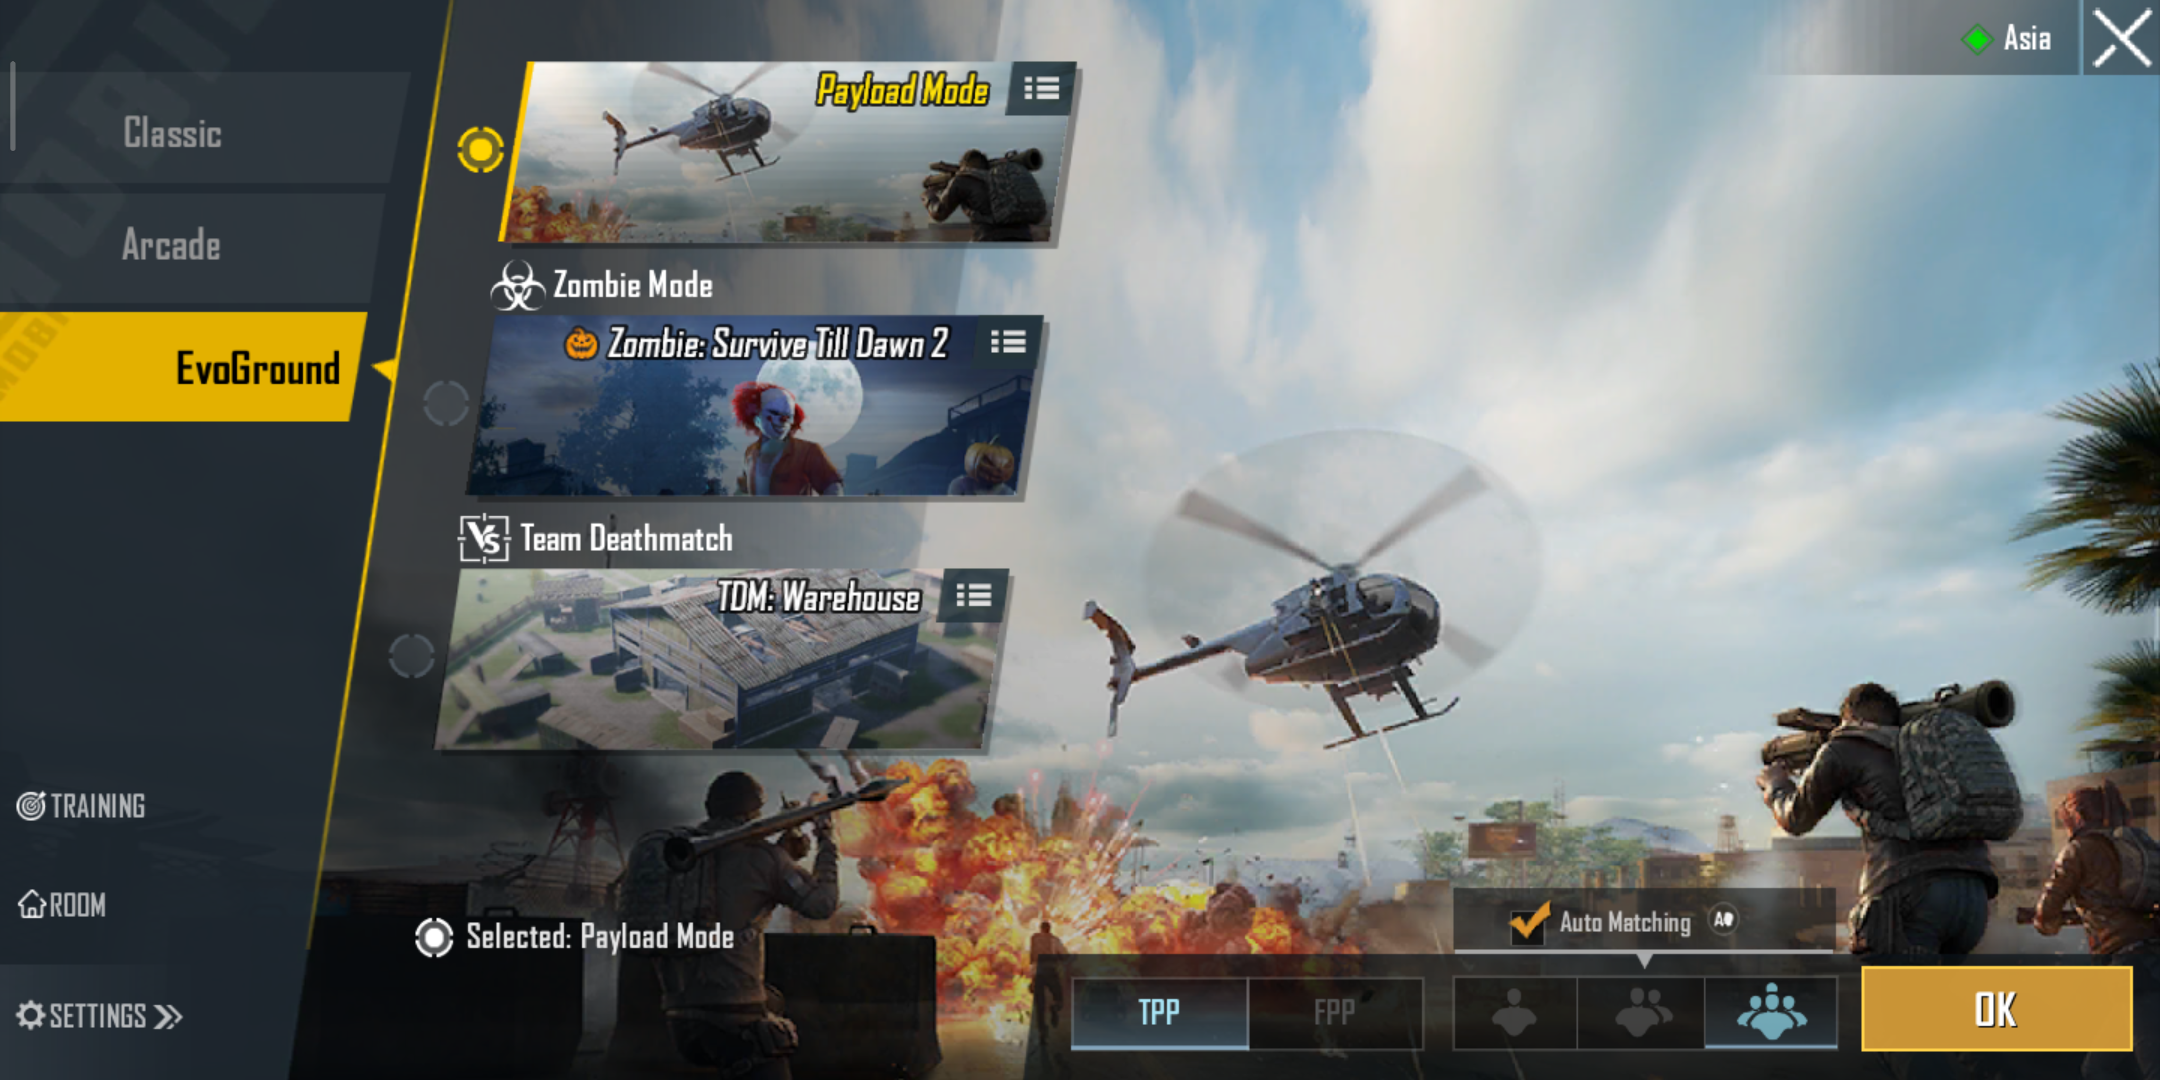 Pubg Mobile Payload Mode Is Live Now Helicopters Super Weapon Crate Machine Gun And More The Indian Wire